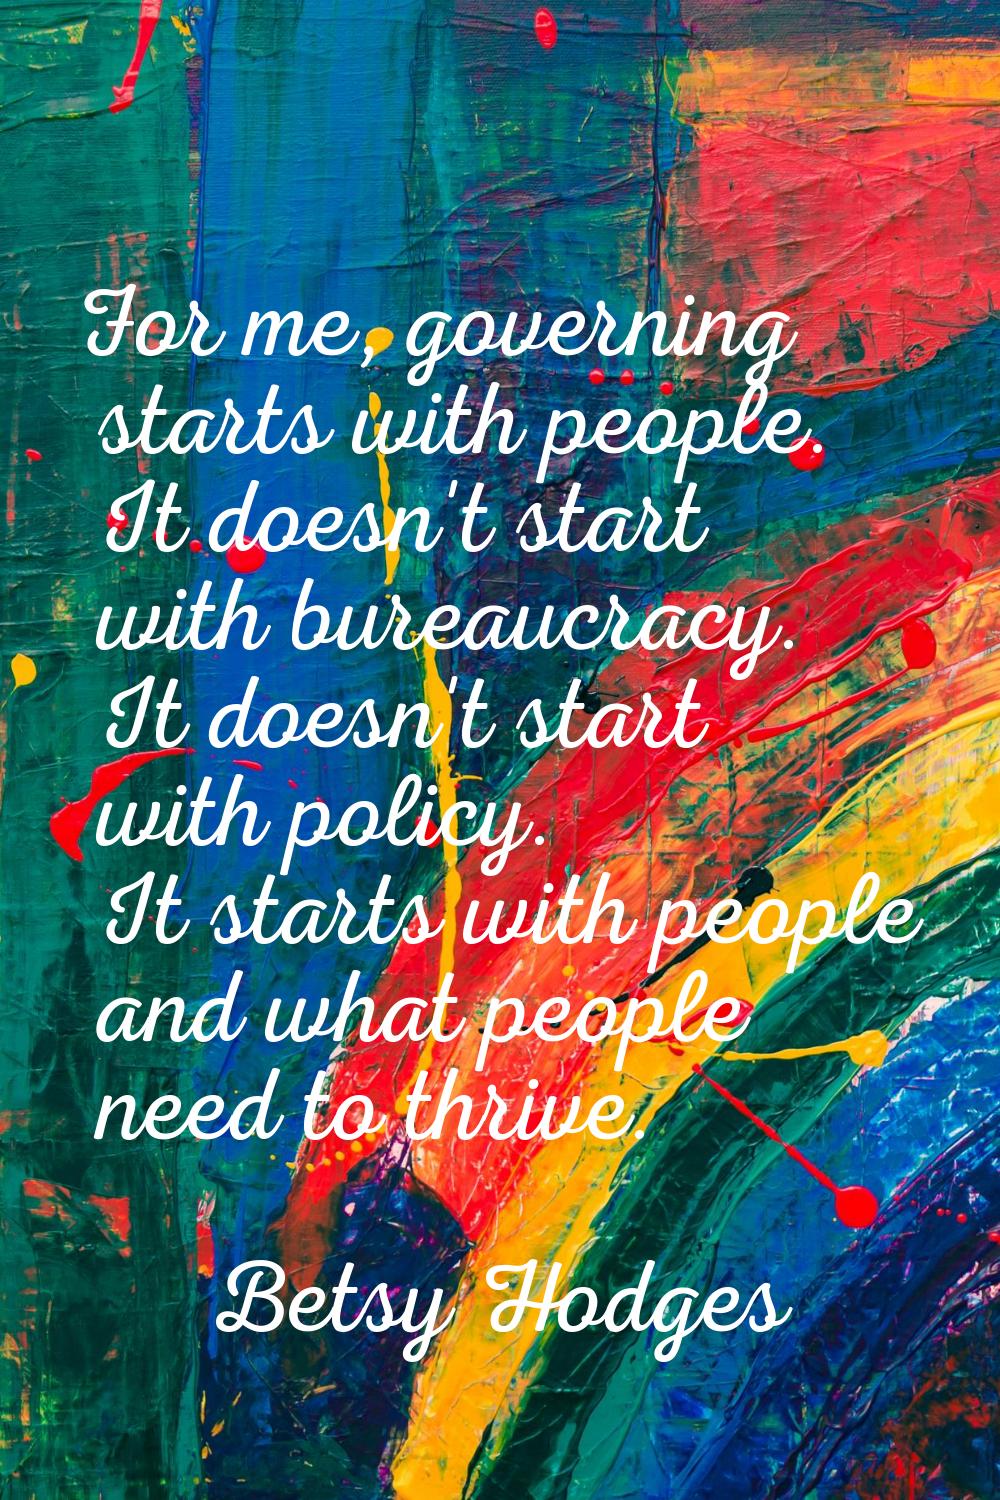 For me, governing starts with people. It doesn't start with bureaucracy. It doesn't start with poli